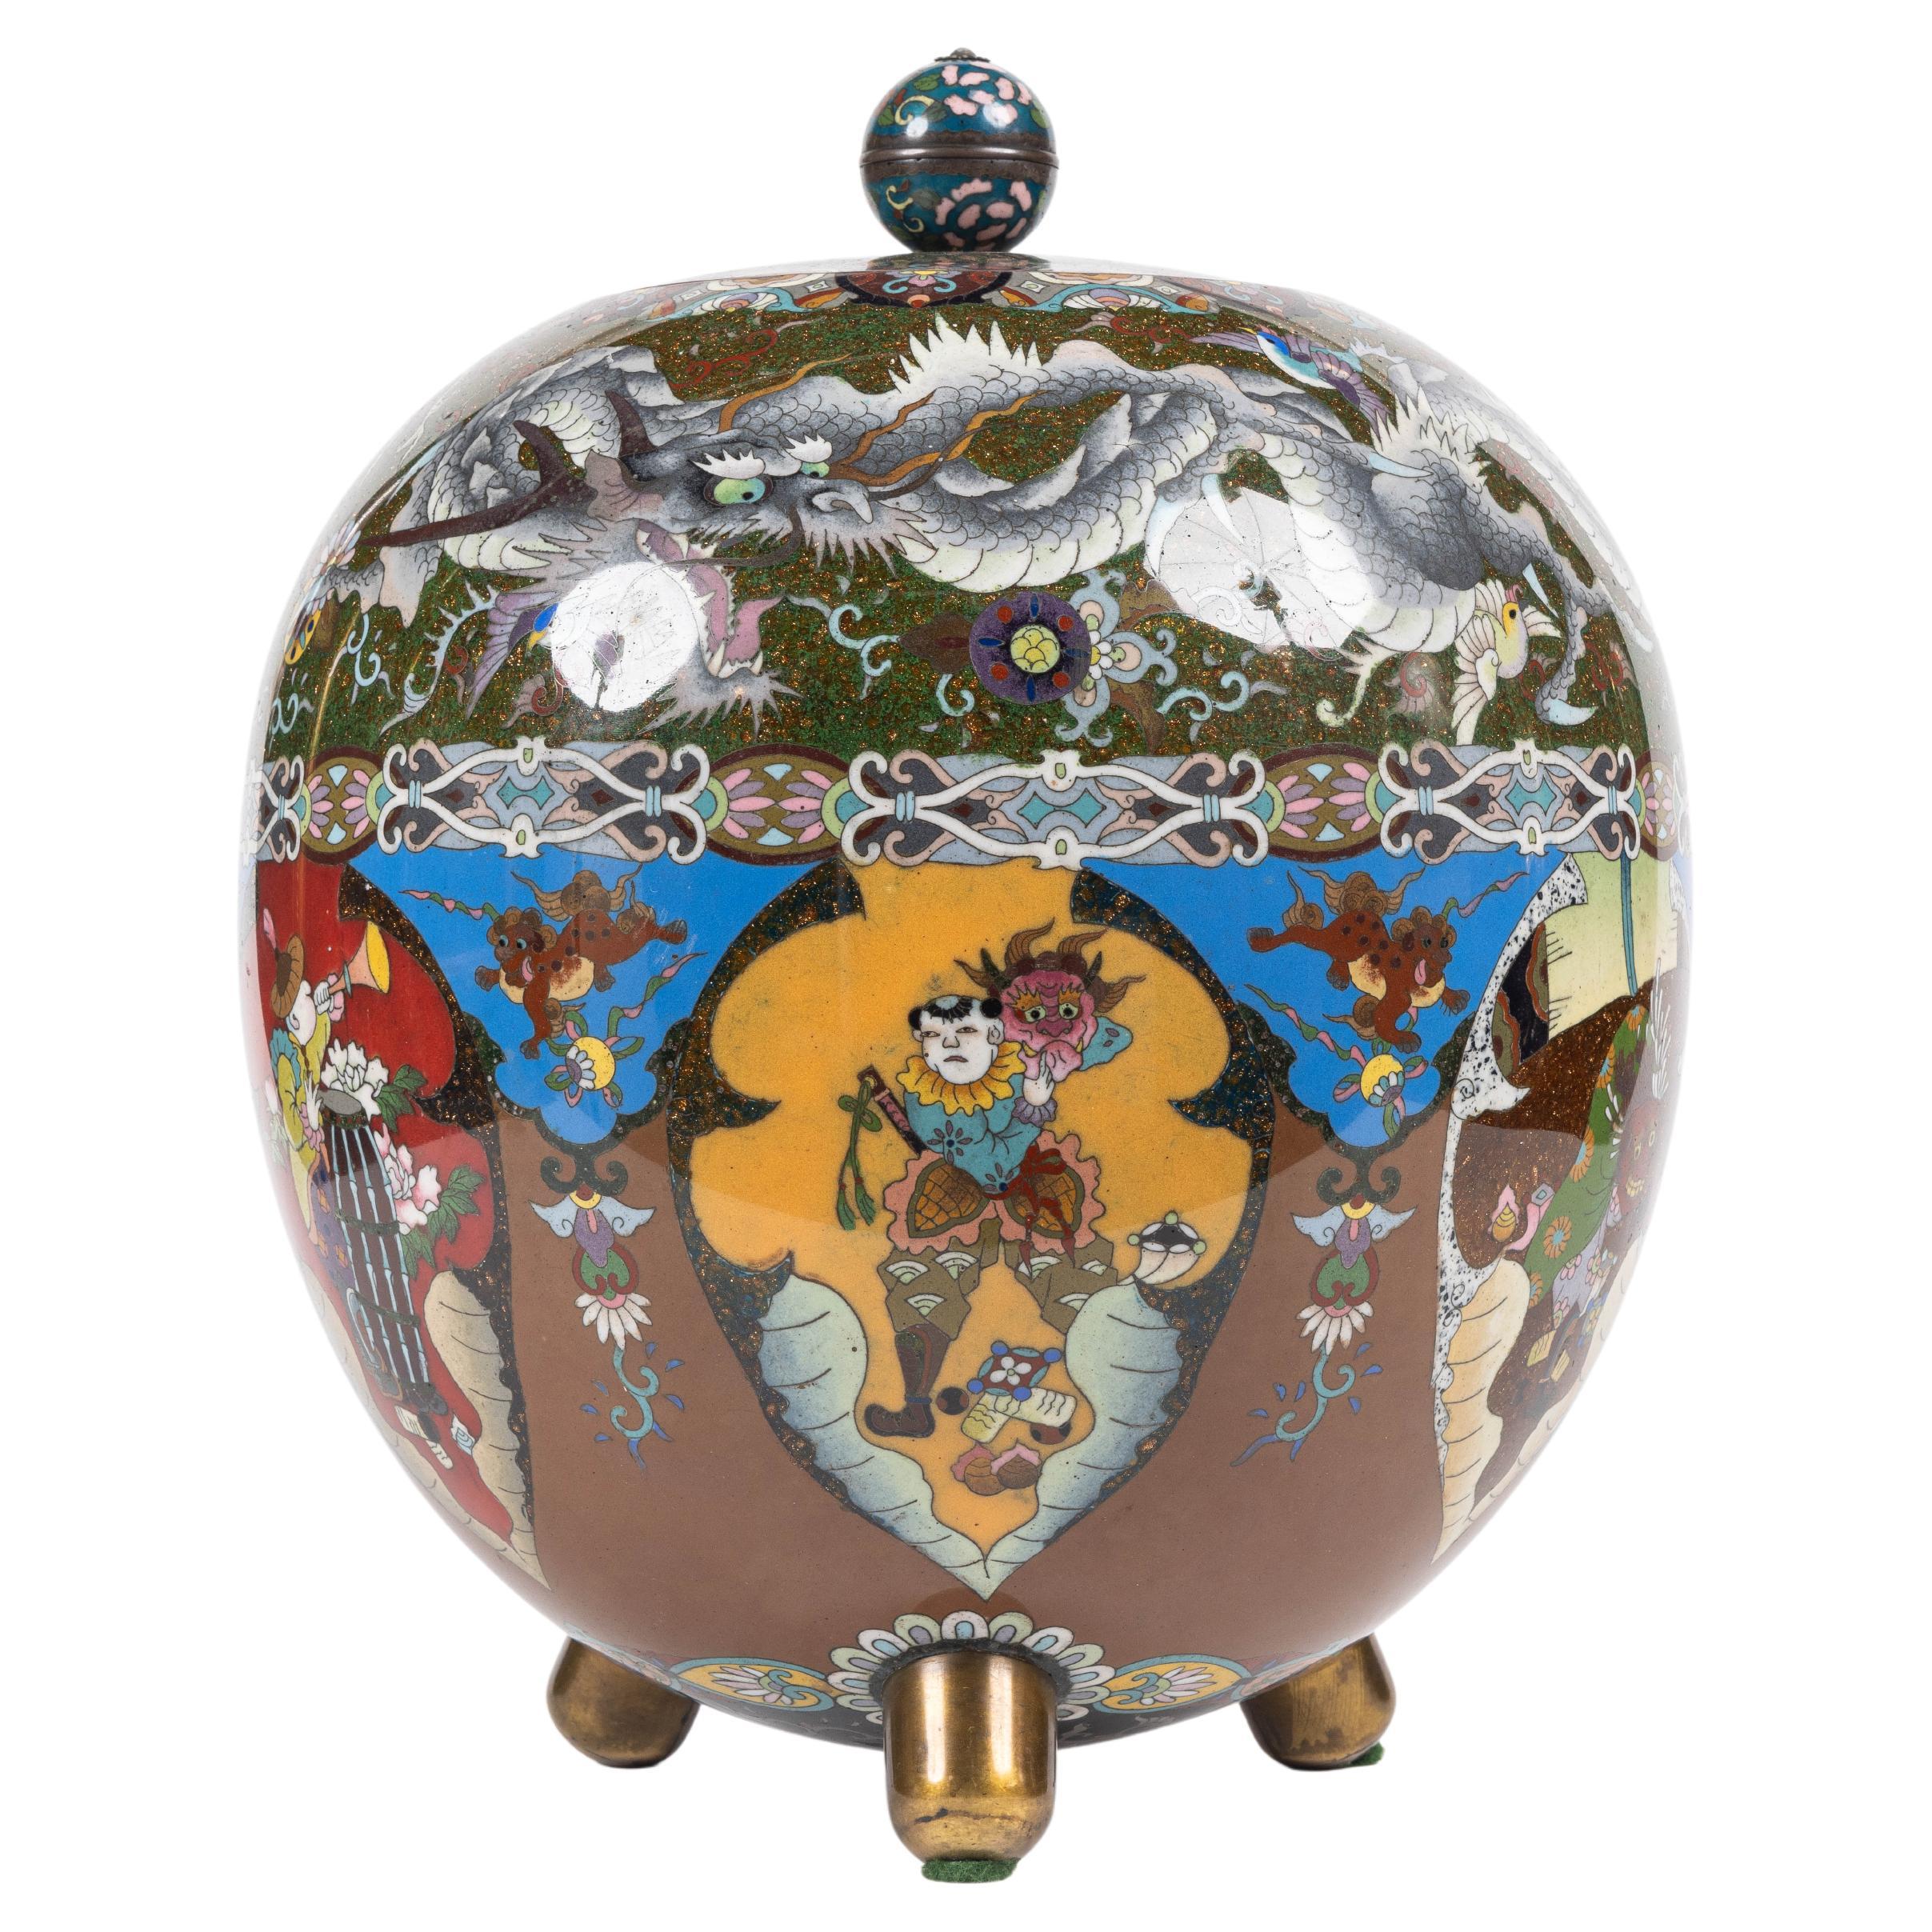 Majestic Japanese Cloisonne Enamel Covered Jar with Dragons, Theater Characters  For Sale